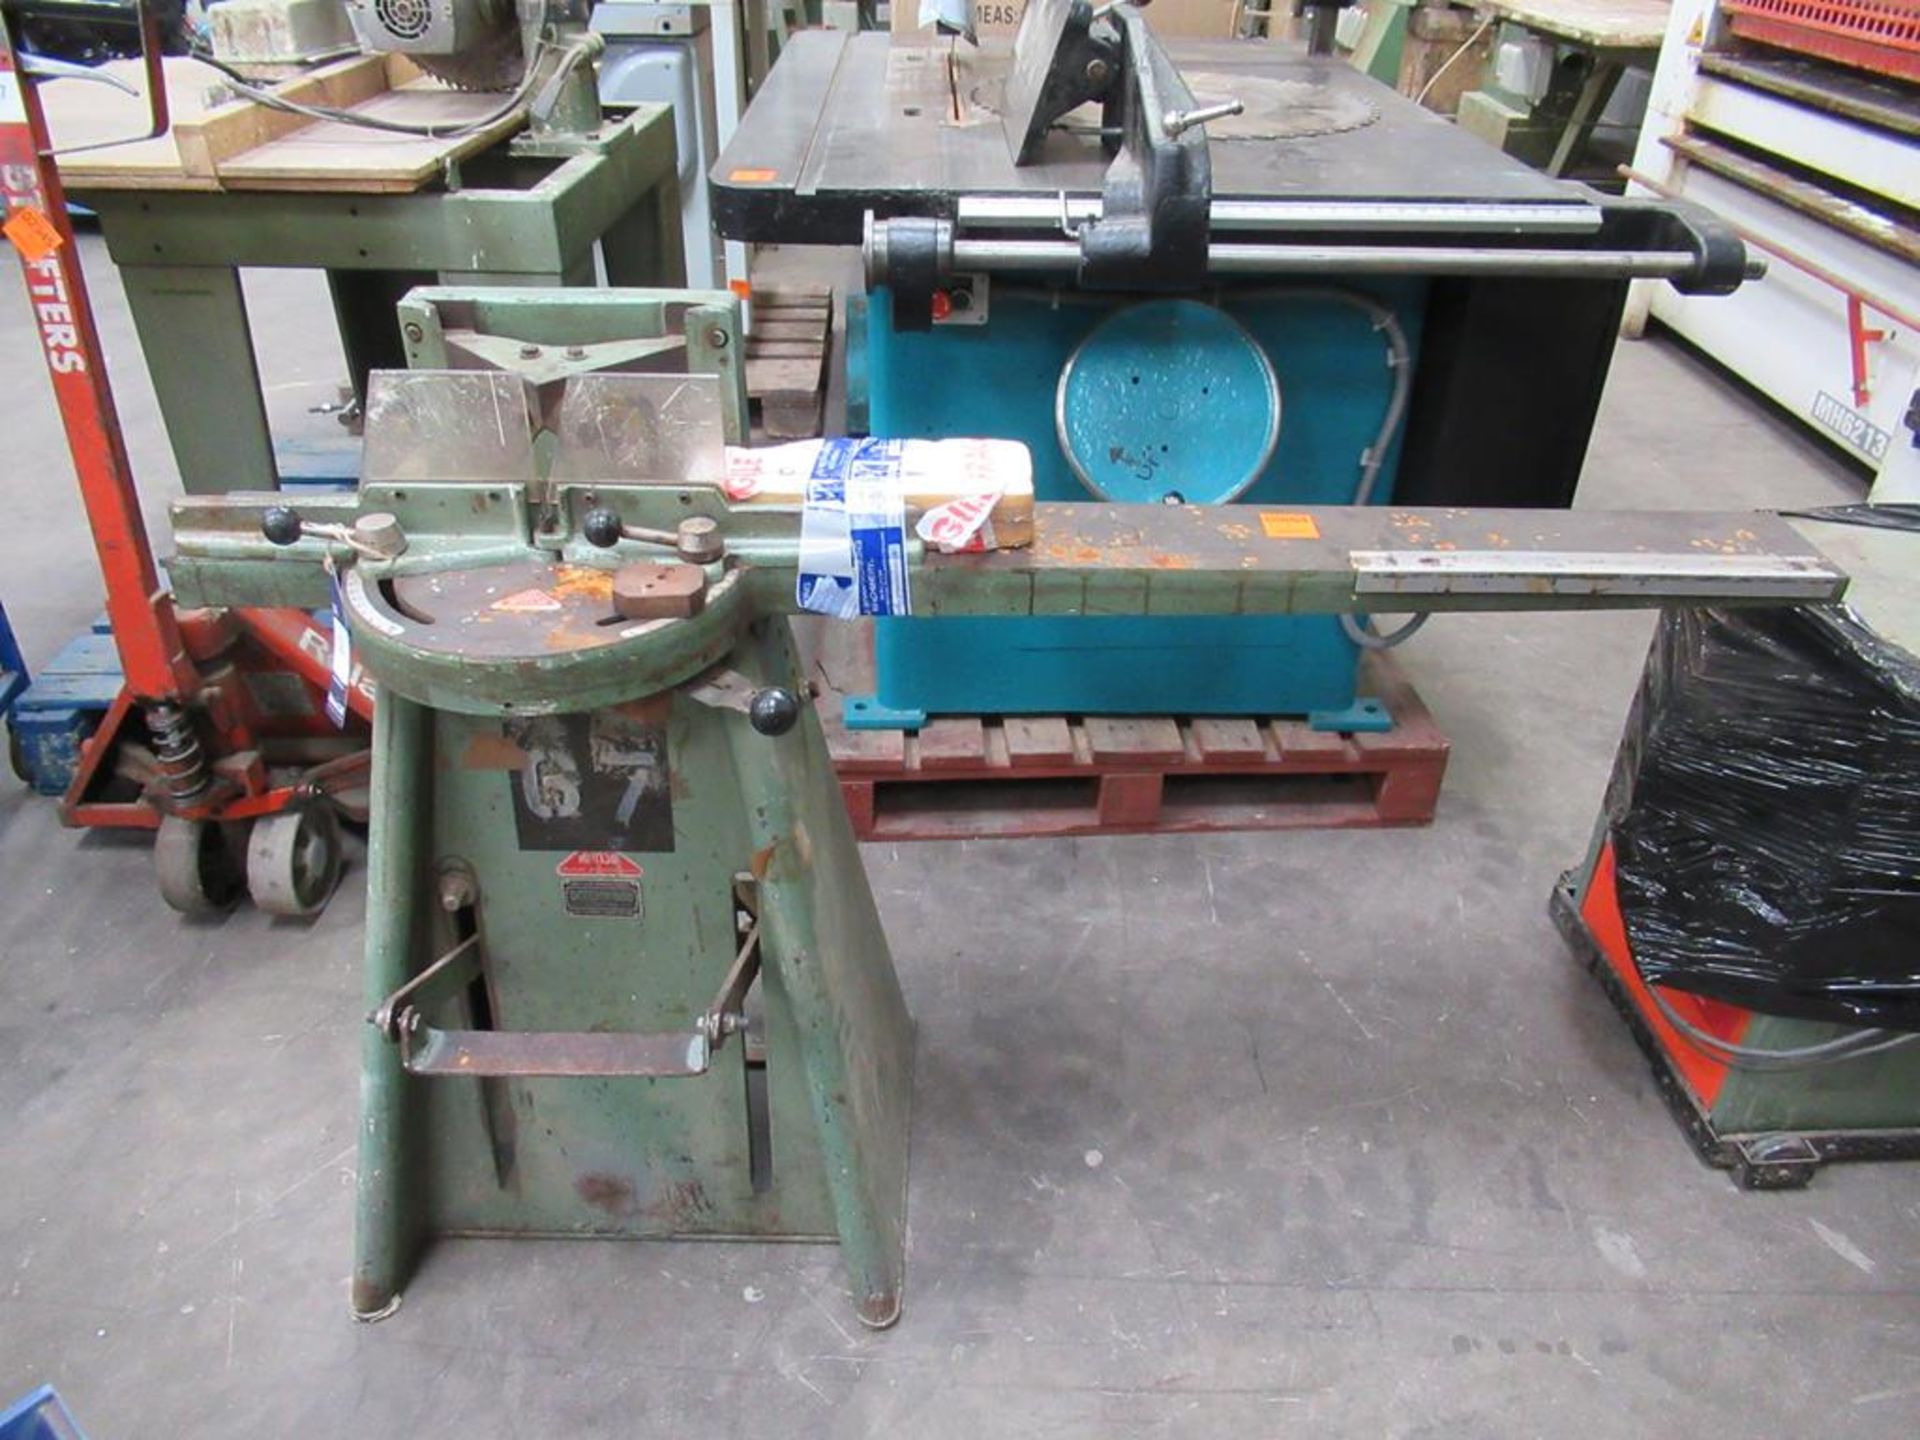 A Moro Mitre Guillotine, foot pedal operated